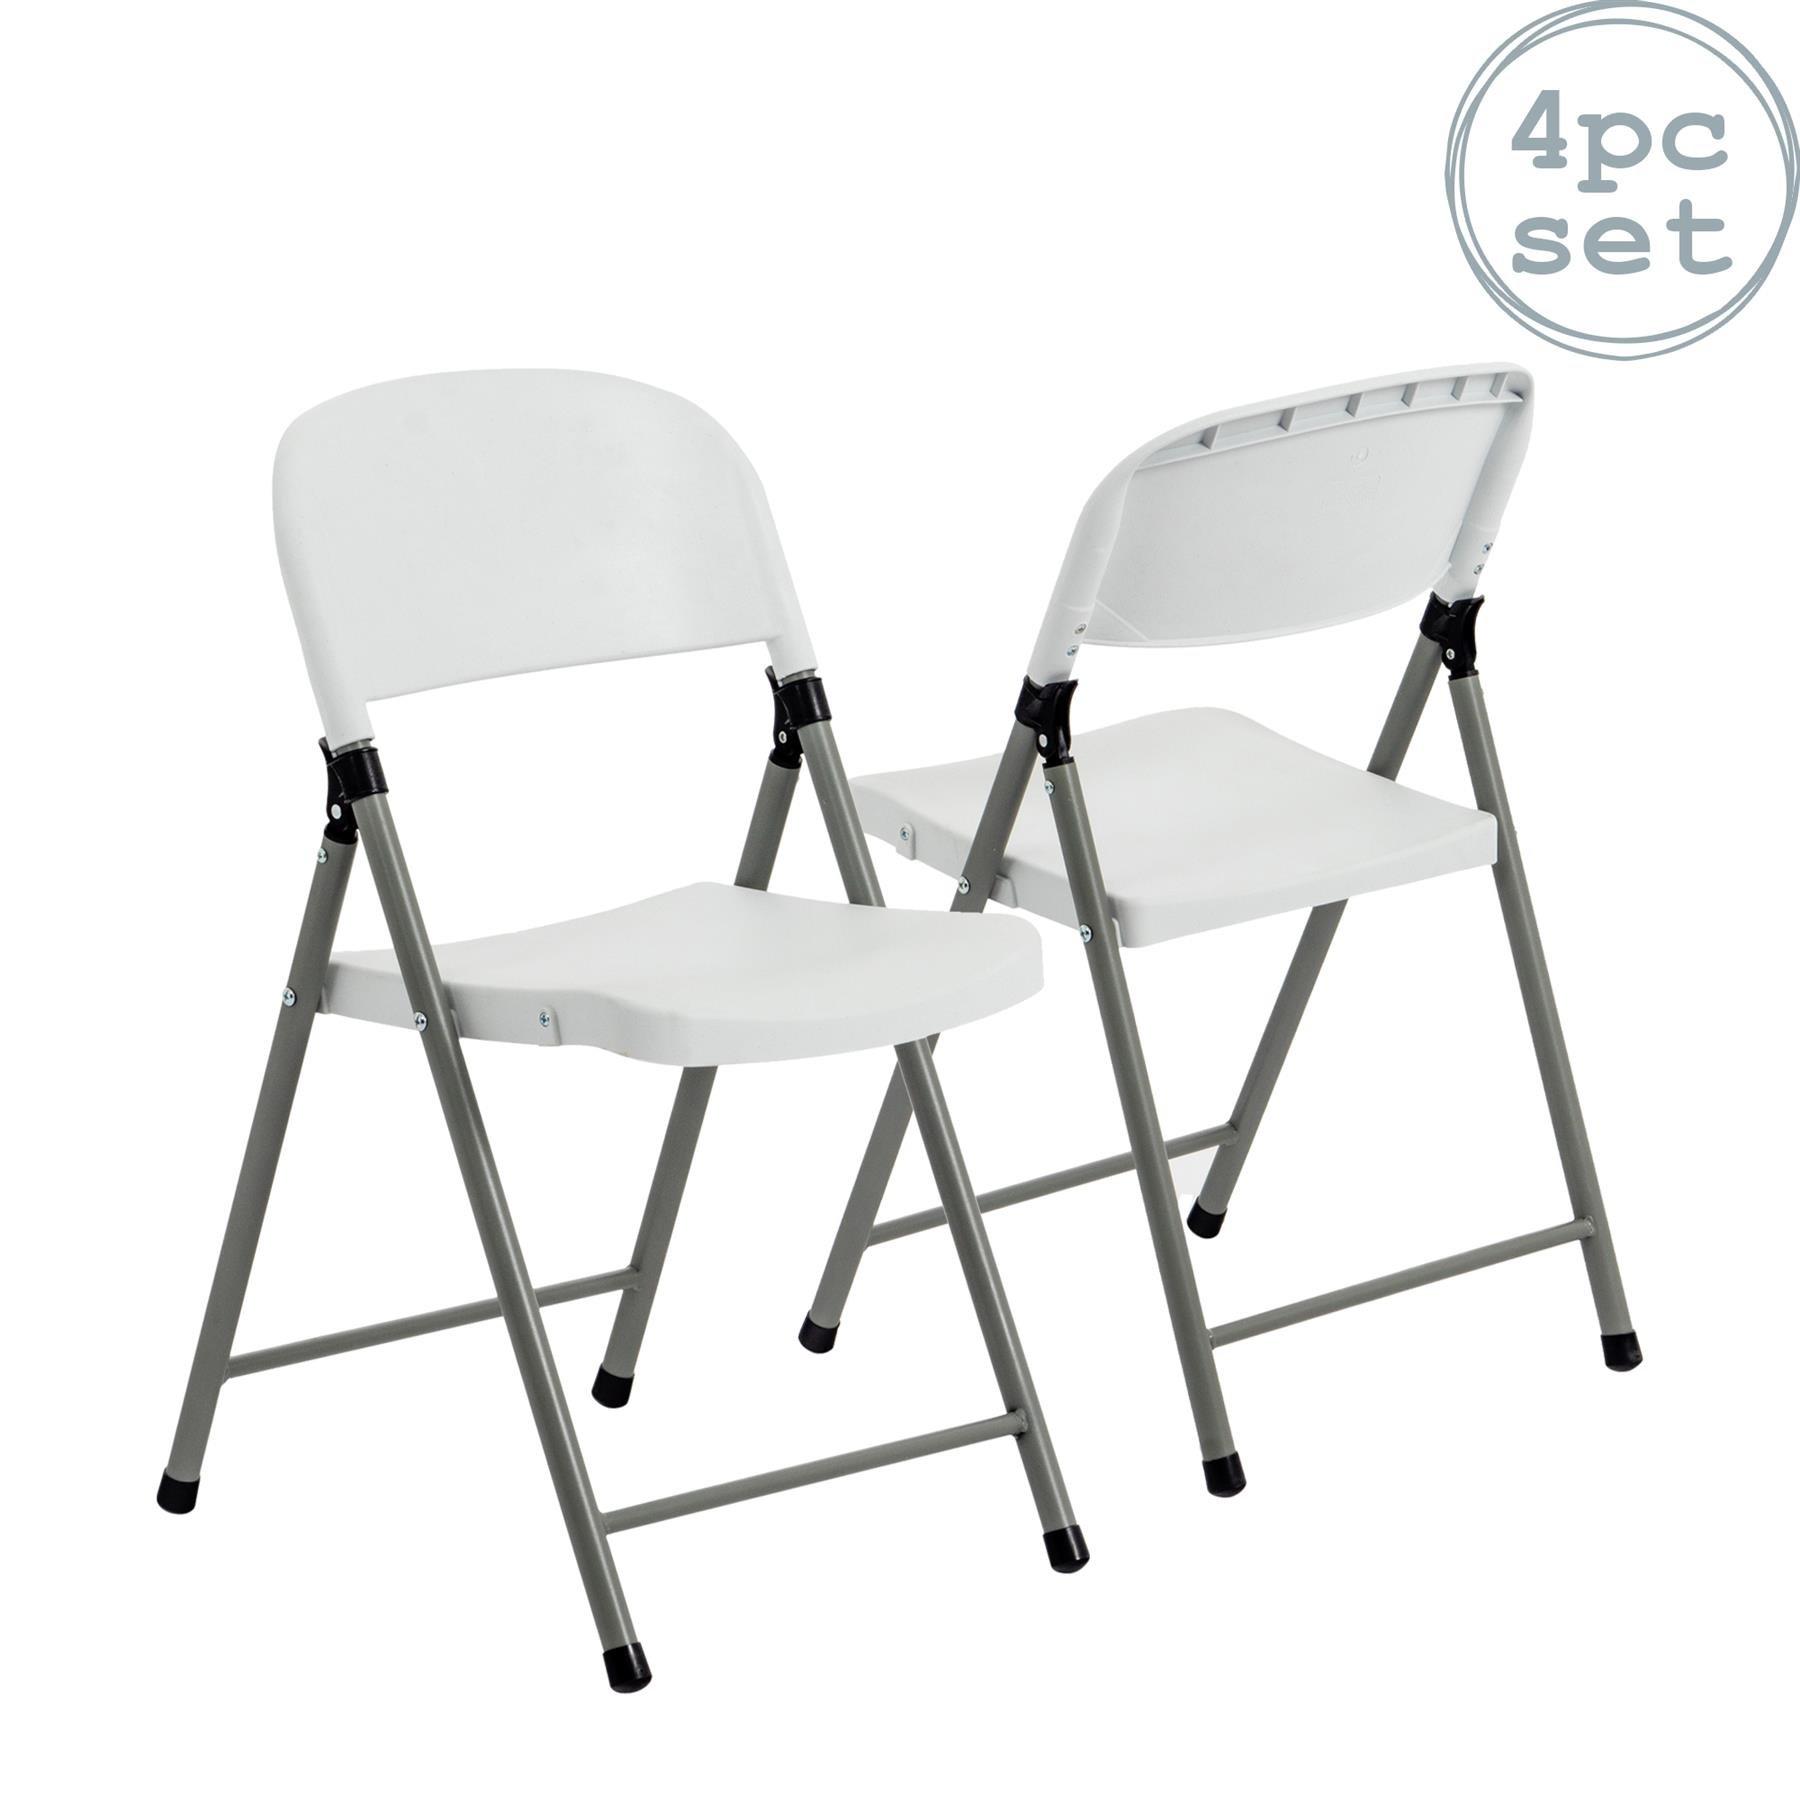 Folding Trestle Chairs White Pack of 4